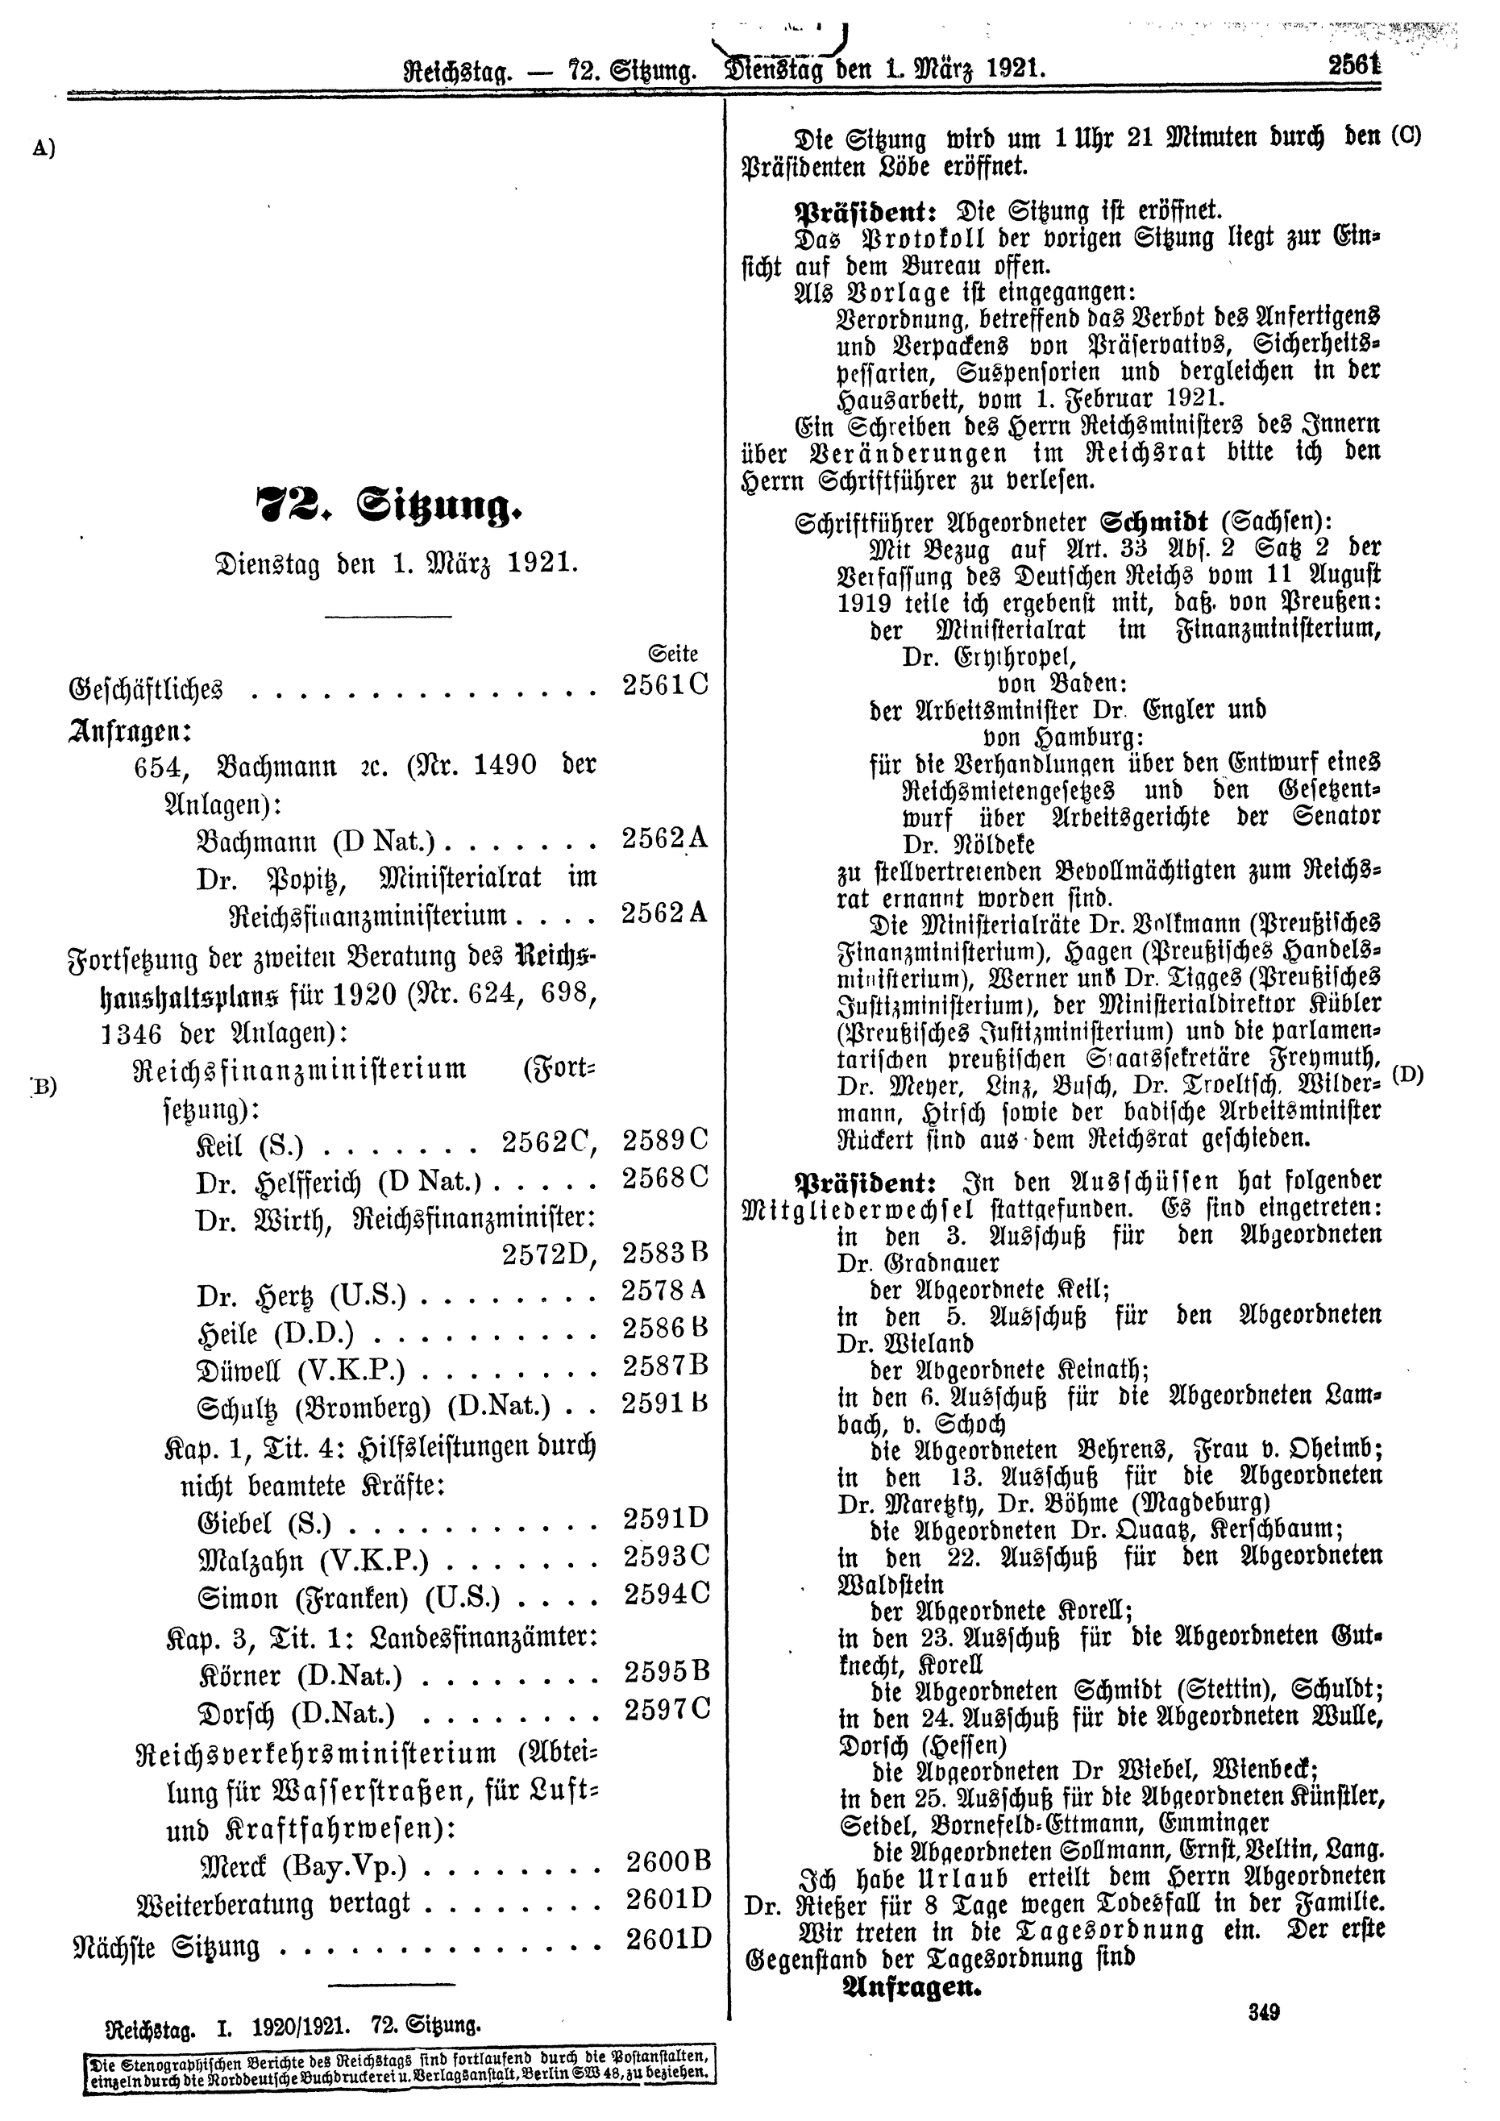 Scan of page 2561